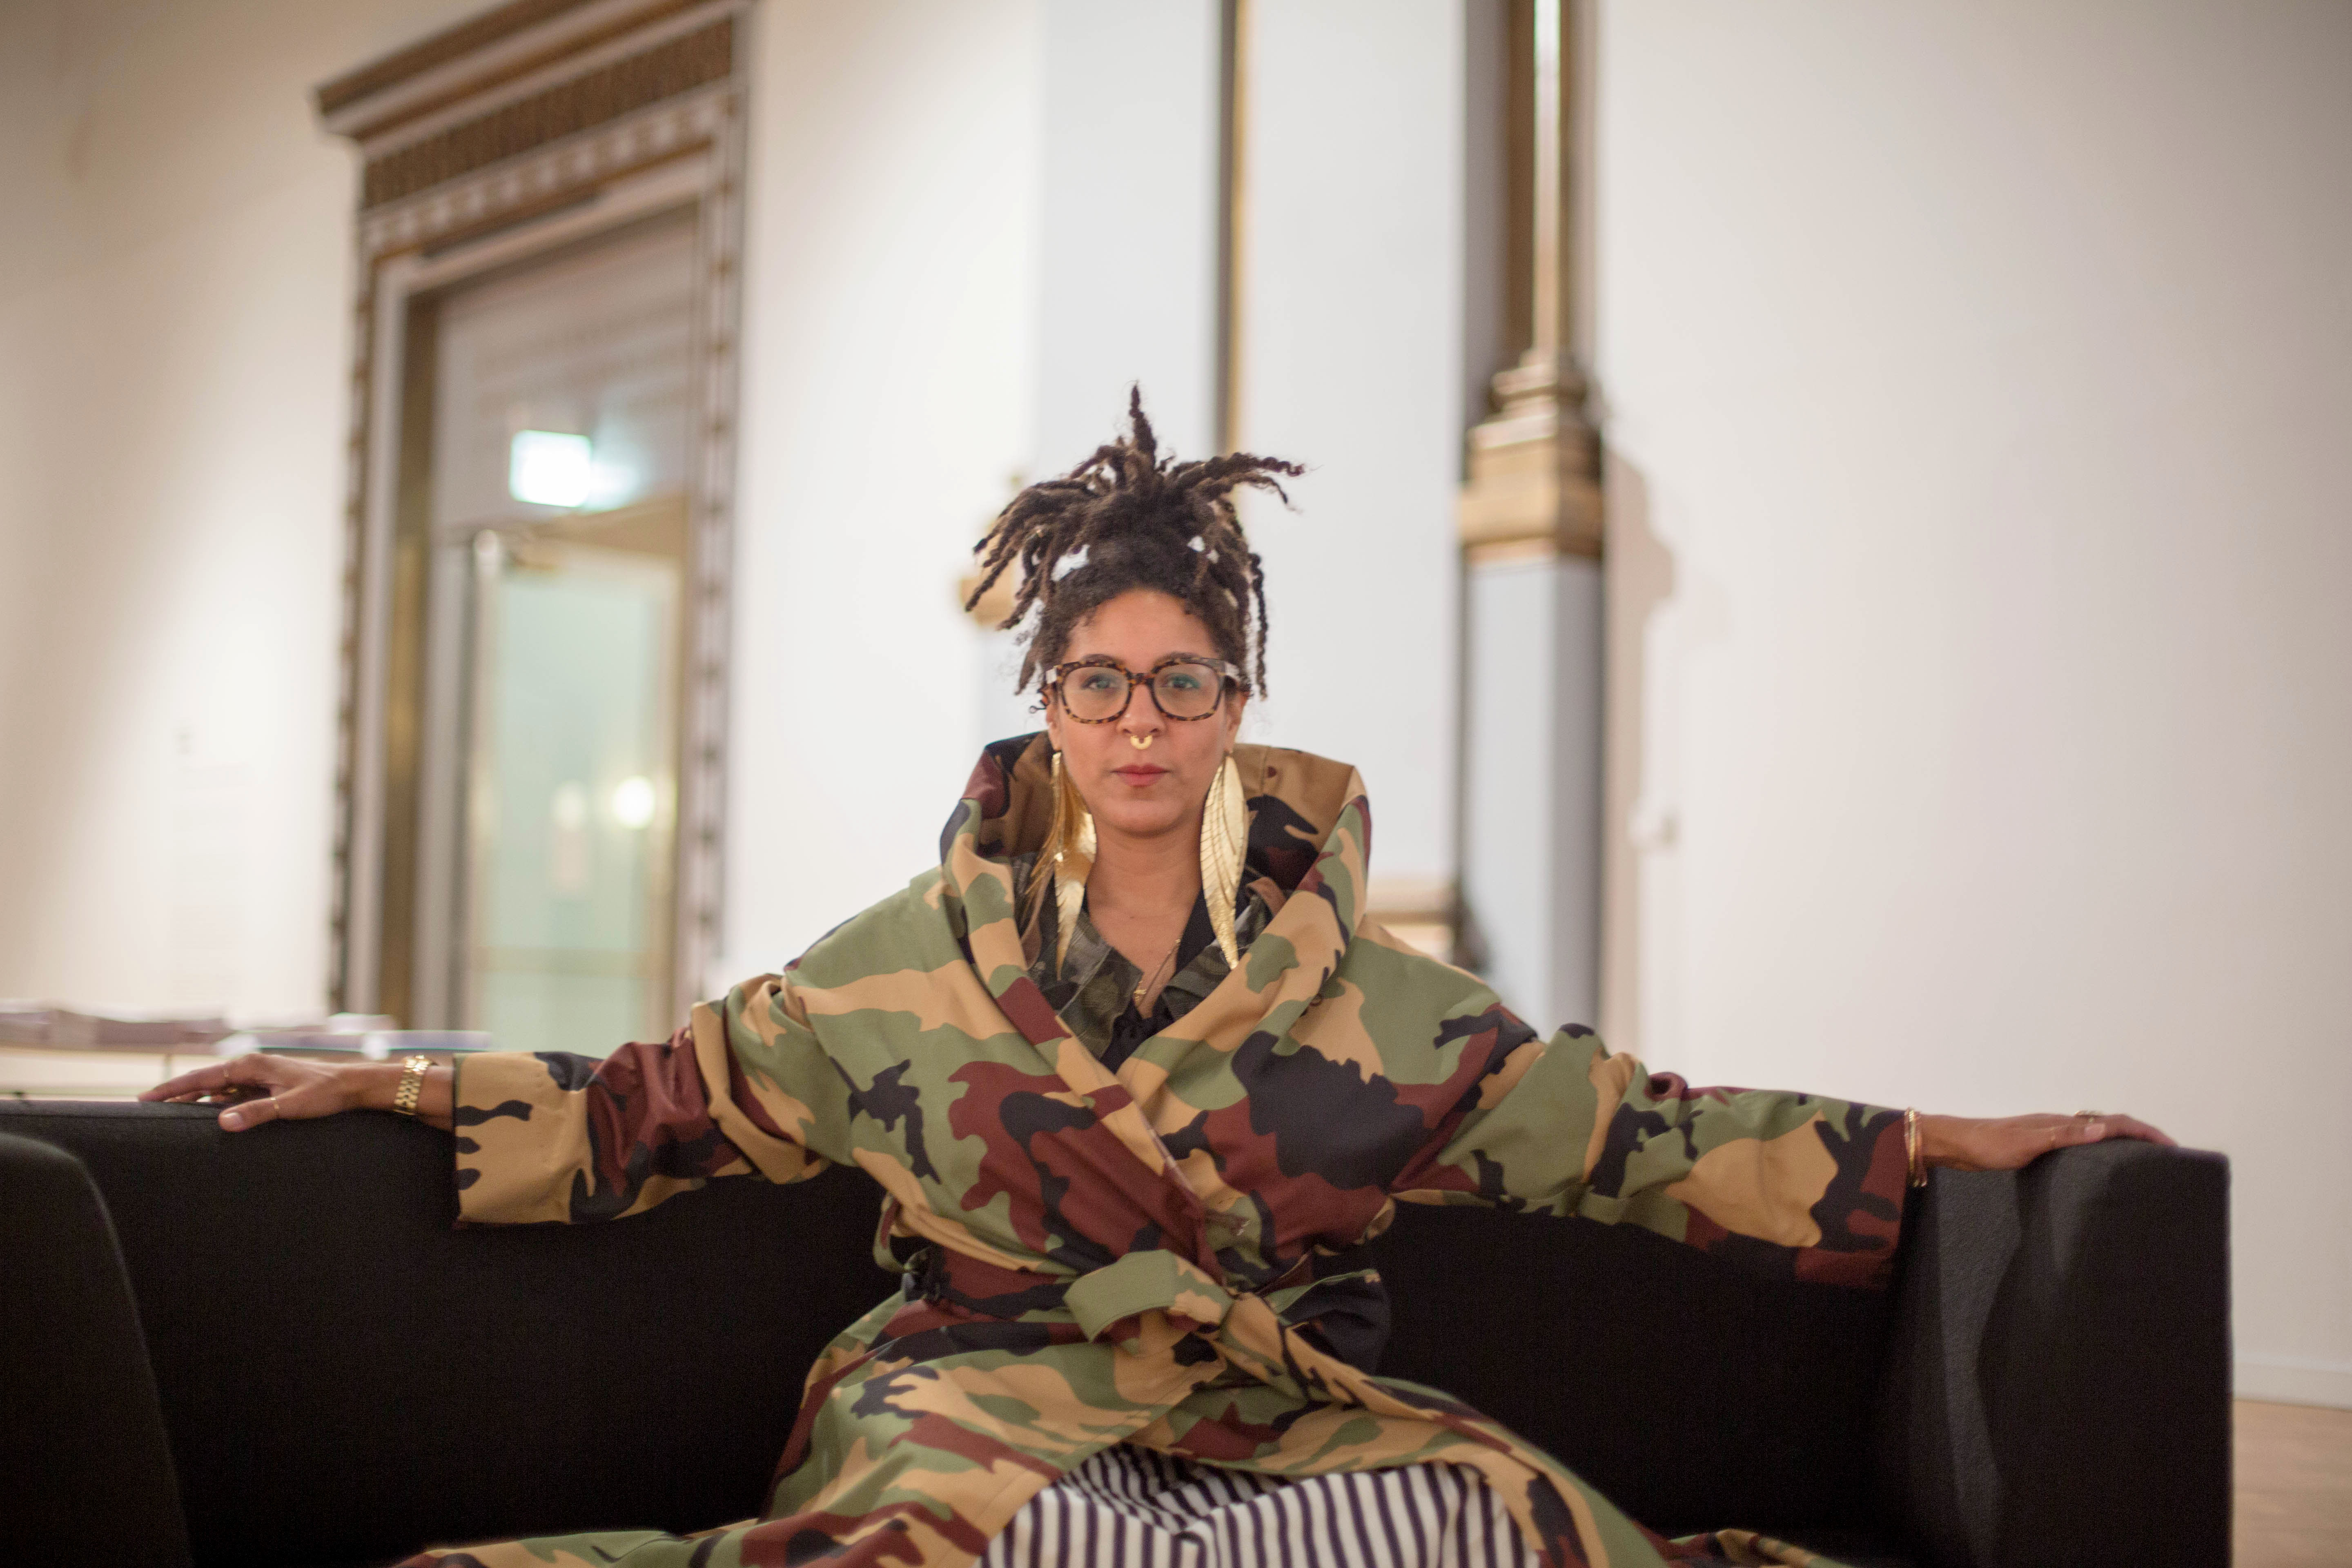 Image: D. Denenge Duyst-Akpem wearing the garment "The Camo Coat, part of the Osanyin Commemorative Project," and sitting on a black sofa in the "African American Designers in Chicago" exhibition at the Chicago Cultural Center. Photo by Ireashia Bennett.